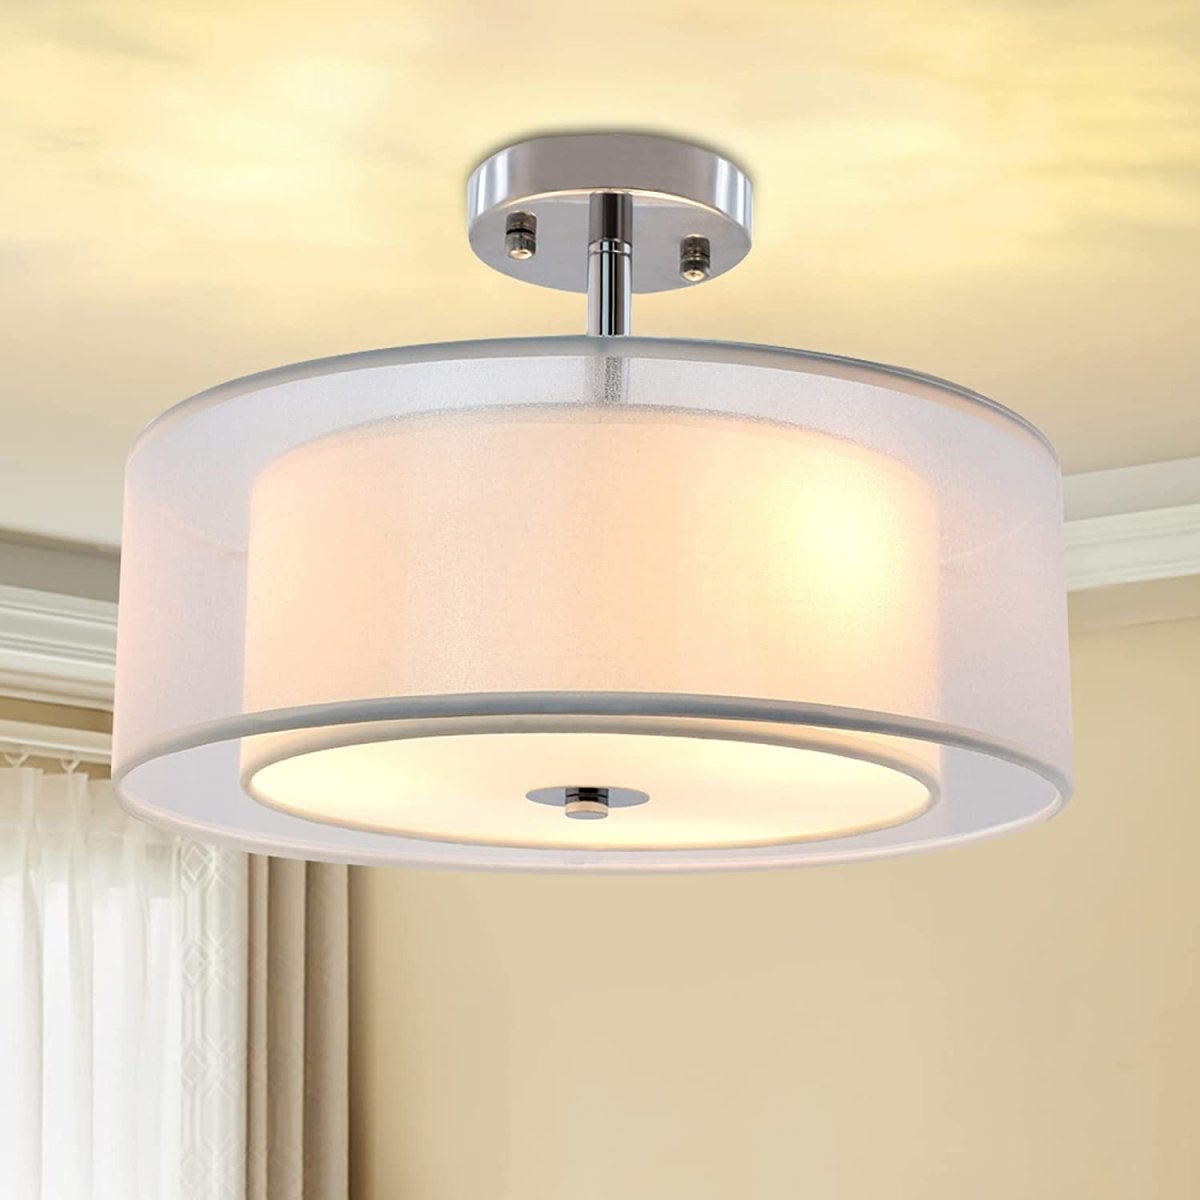 Depuley 3-Light Industrial Semi Drum Flush Mount Light, 15 Inch Double Drum Pendant Close to Ceiling Light Fixture for Bedroom, Dining Room, Kitchen, Hallway, Entry, Foyer, Living Room Lighting - WSCL31 2 | DEPULEY